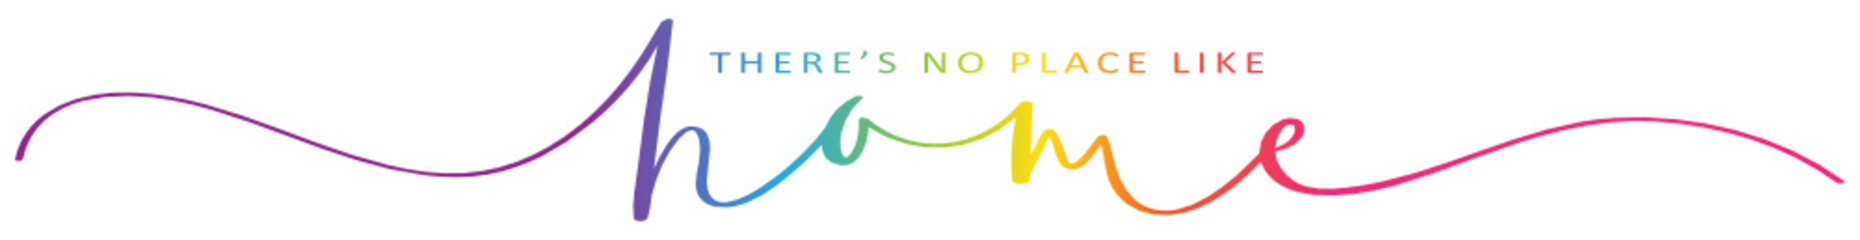 THERE'S NO PLACE LIKE HOME rainbow brush calligraphy banner with swashes